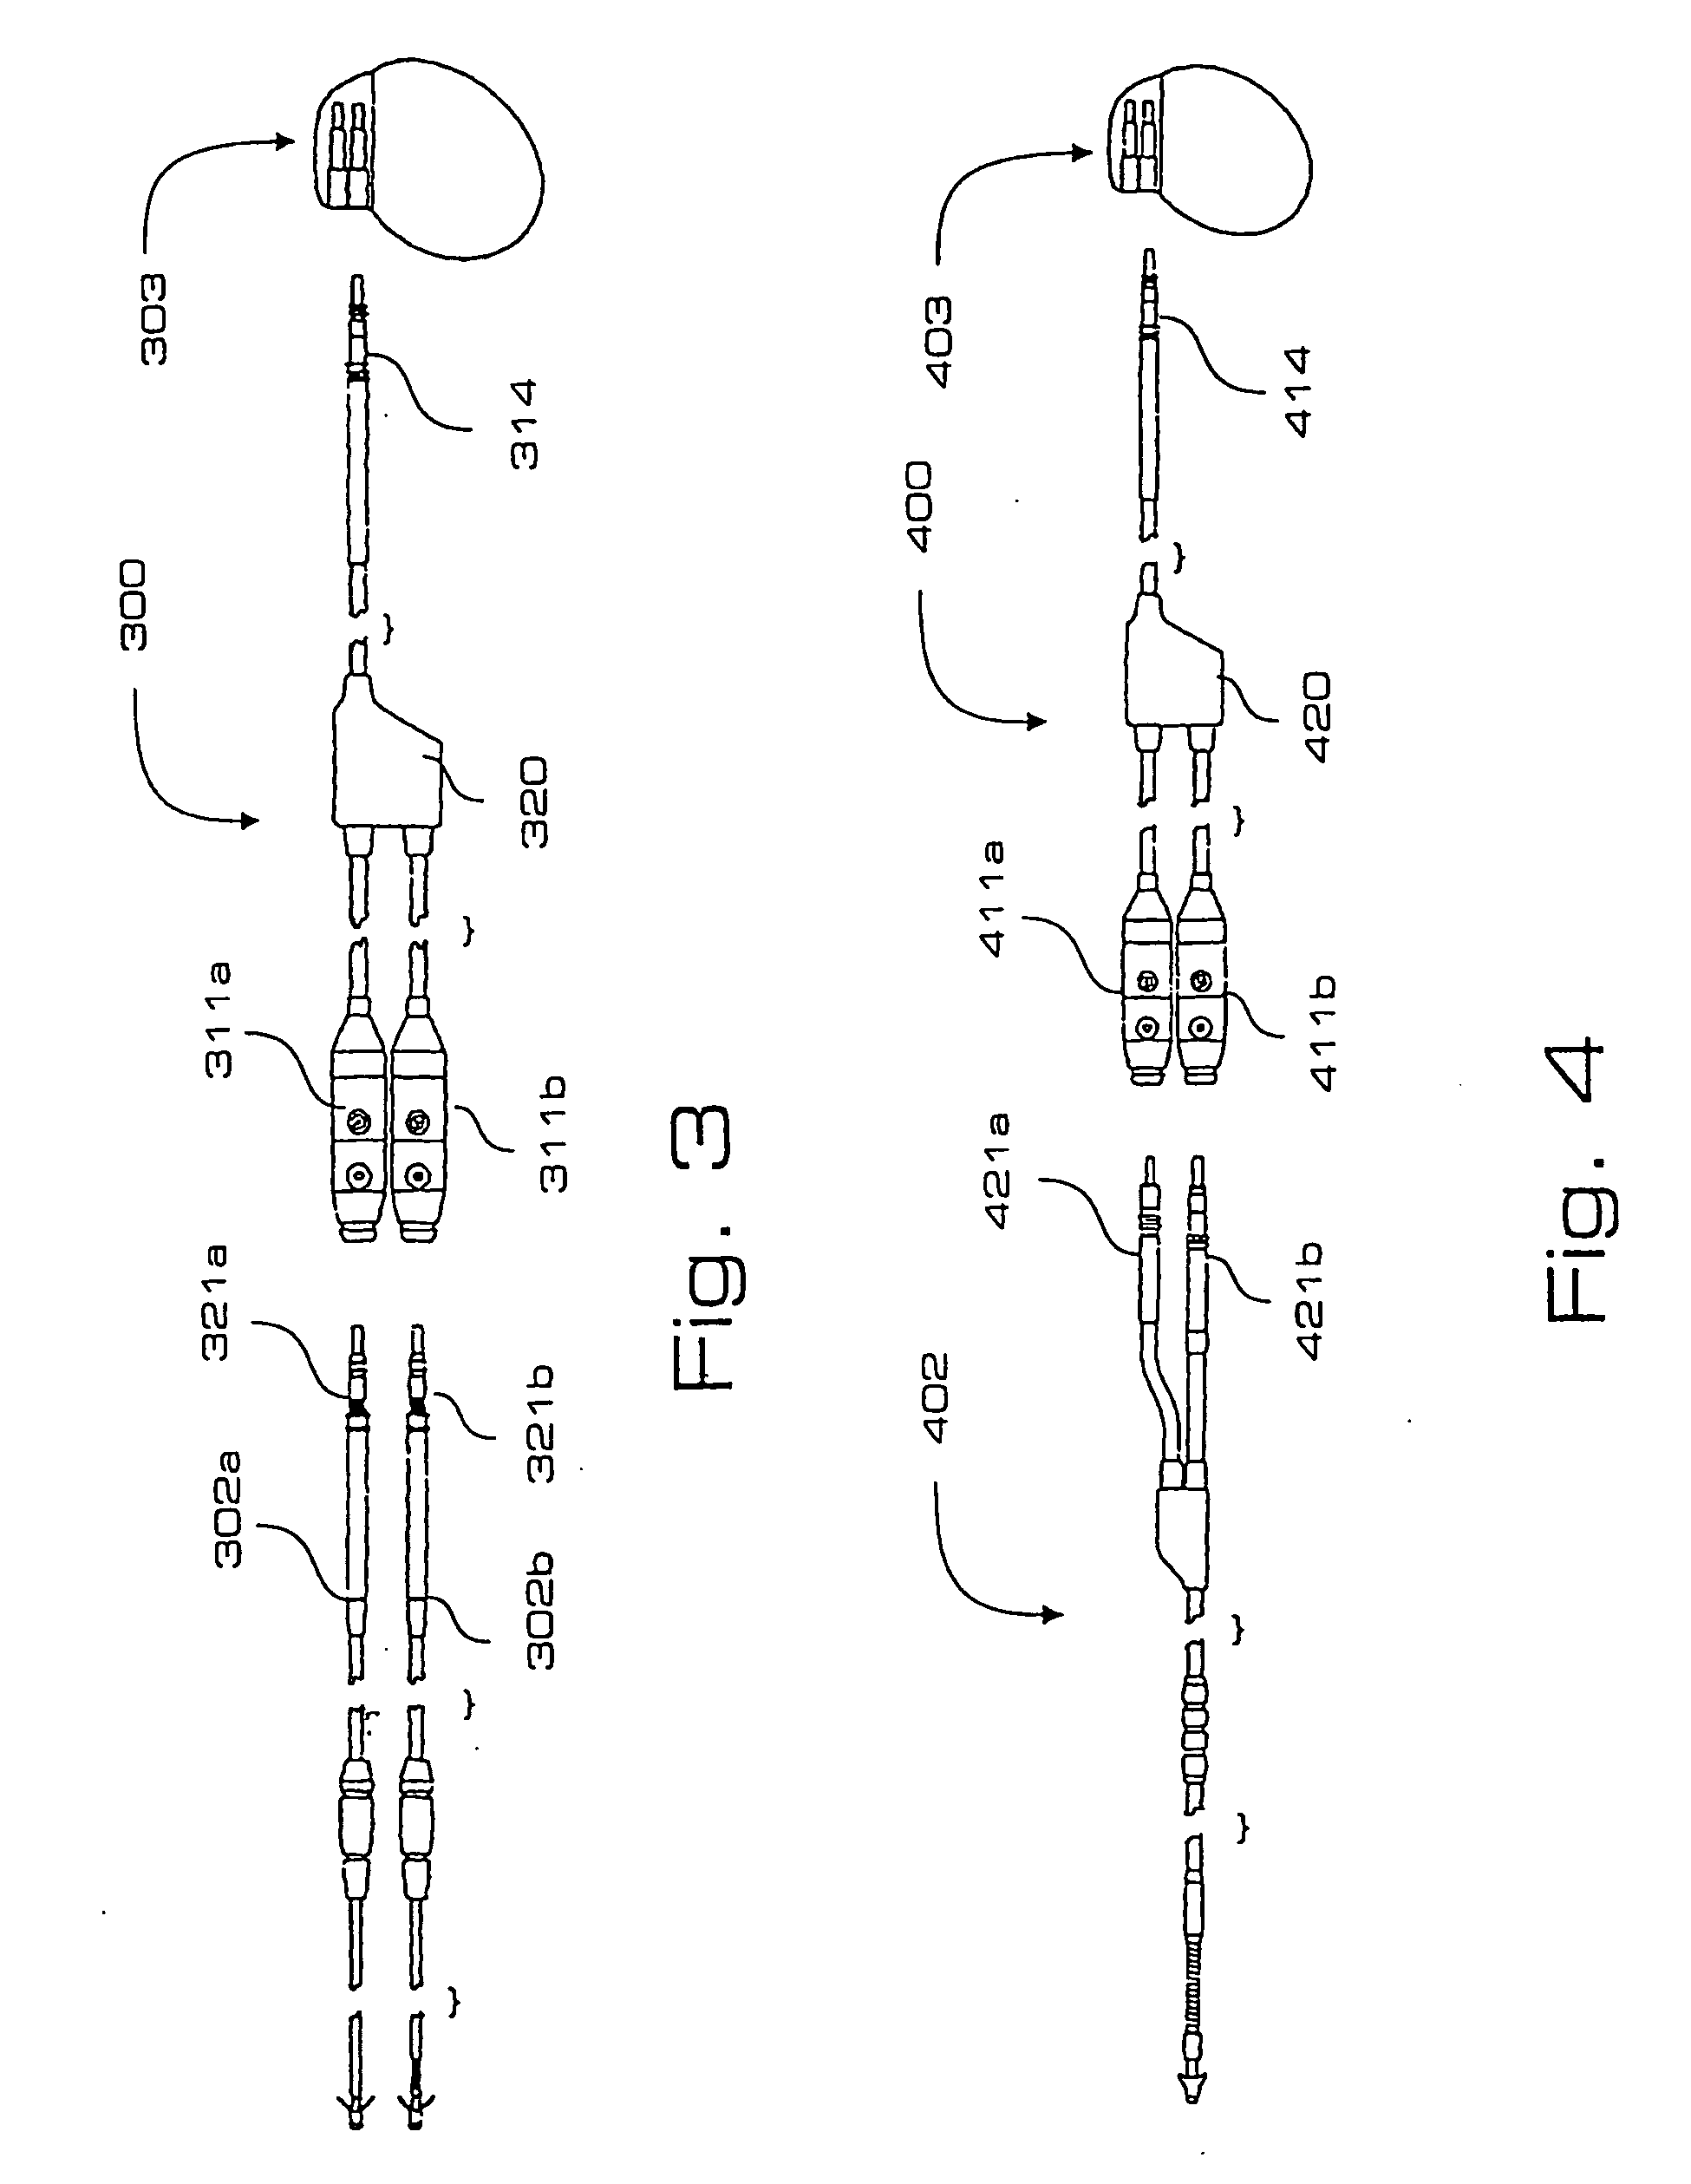 Lead adaptor having low resistance conductors and/or encapsulated housing